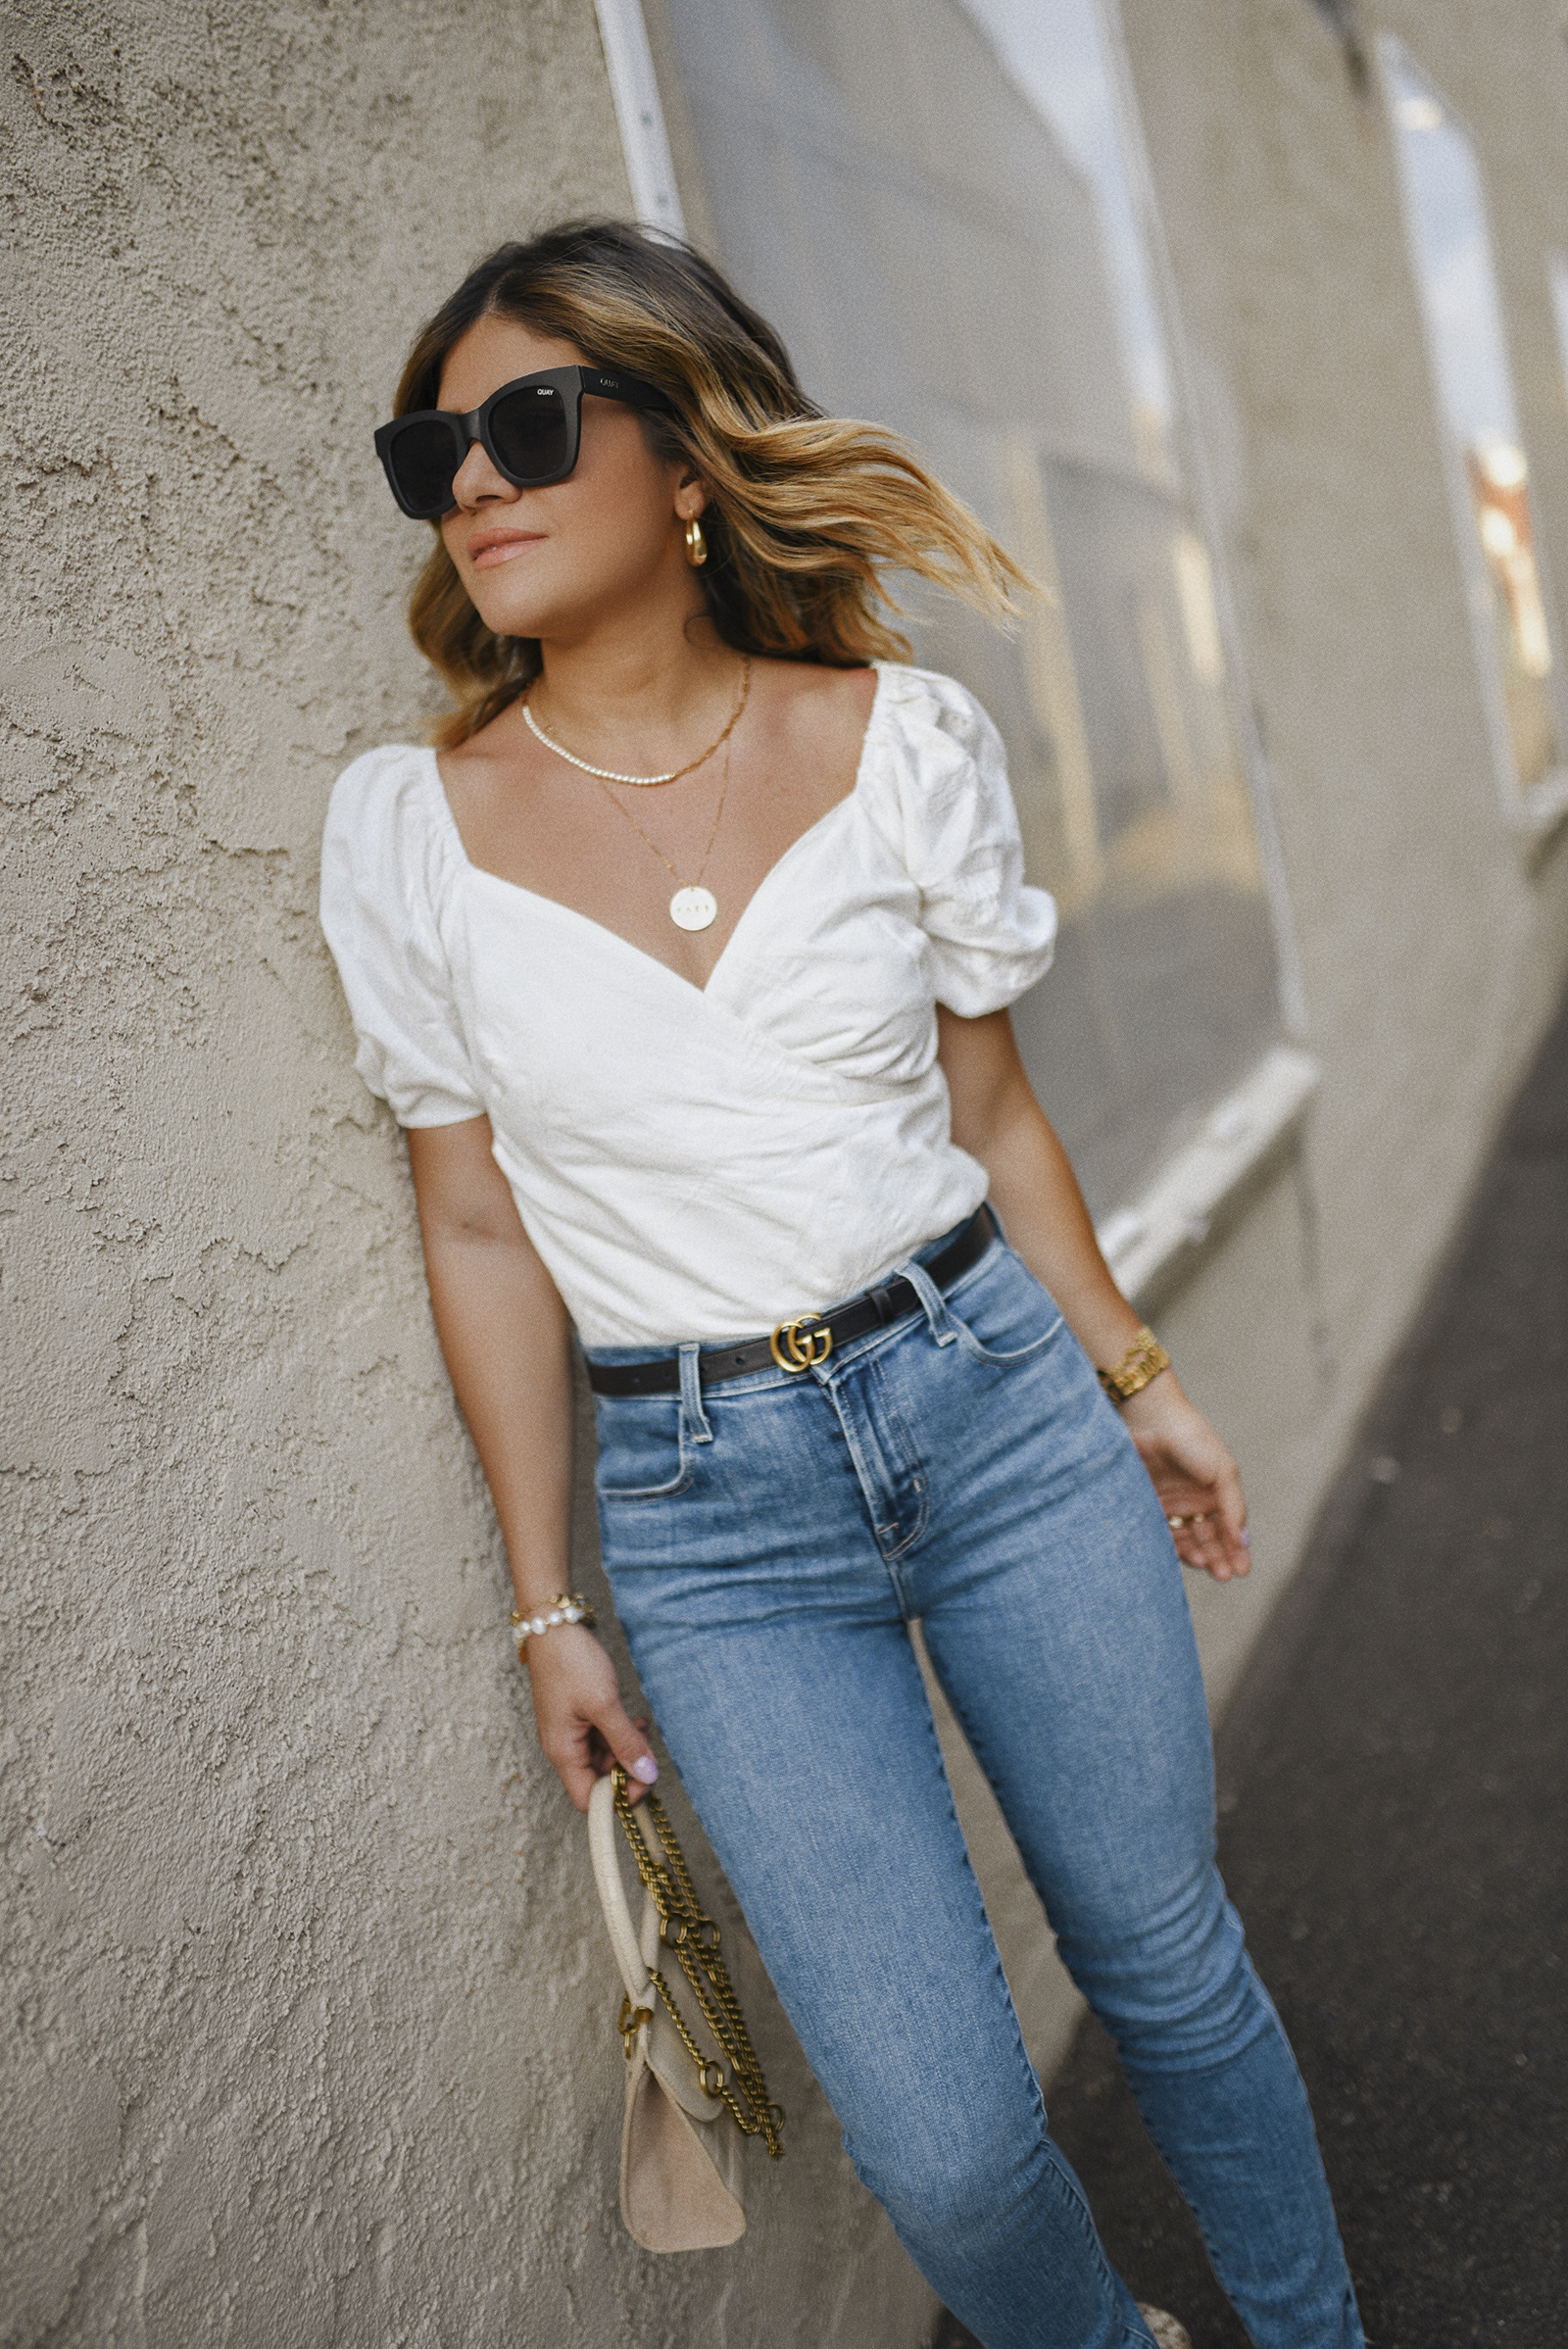 Carolina Hellal of Chic Talk wearing a Lucy Paris white top, Jbrand skinny jeans, Quay sunglasses and Gucci belt 